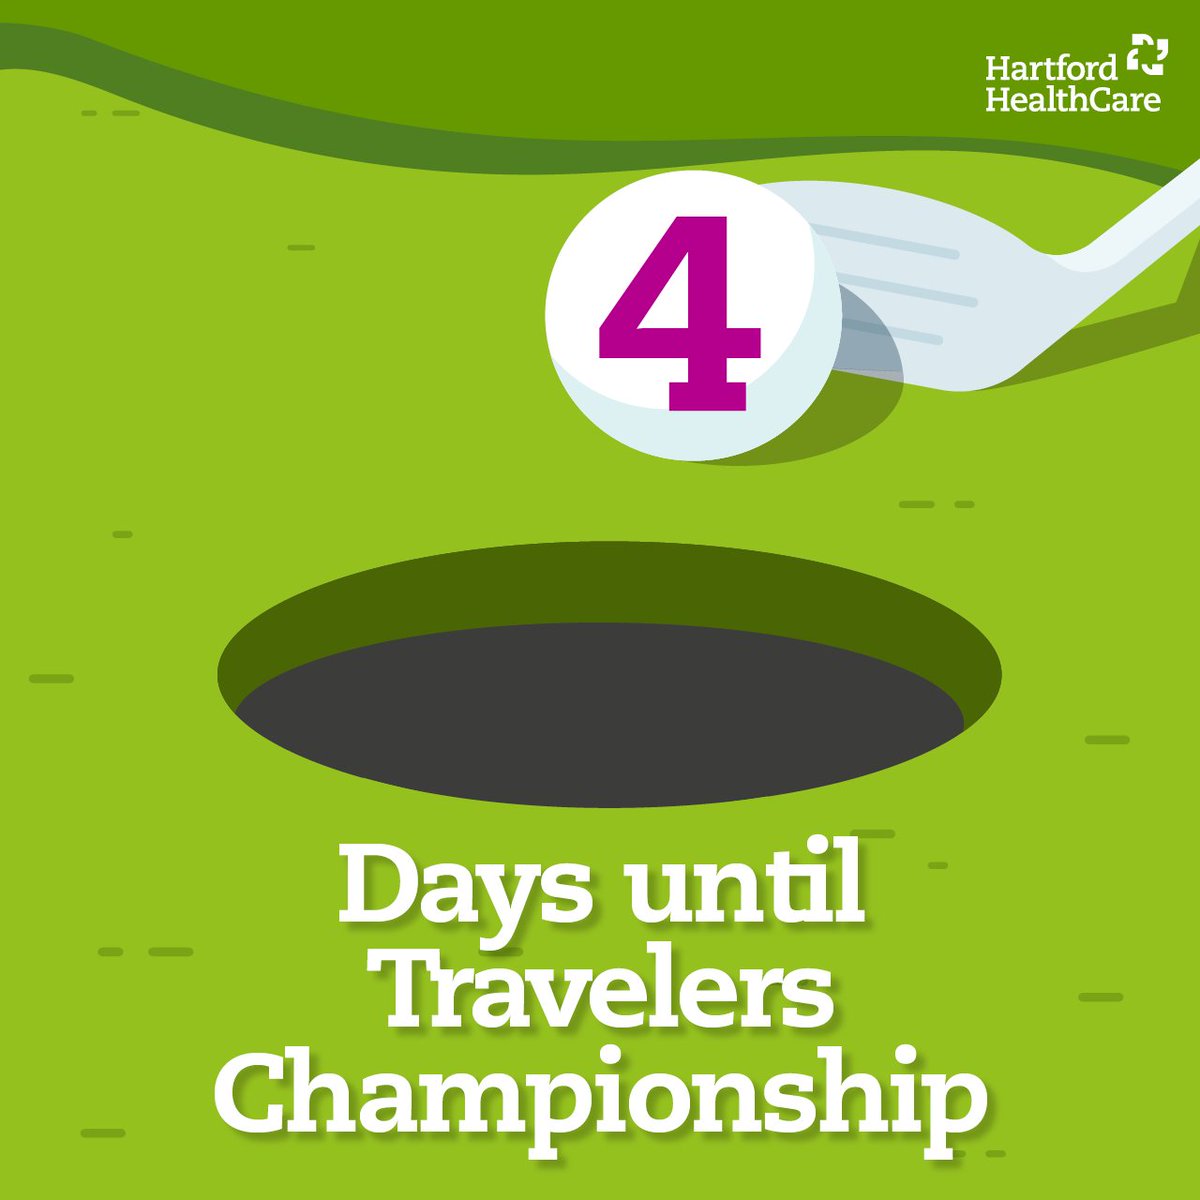 4 more days until the world’s best golfers return to TPC River Highlands in Cromwell, Conn., for the #TravelersChampionship2022. We will have various fun activities in our #HHCSportsZone for both kids and adults. We cannot wait for you to join us! 🏌️